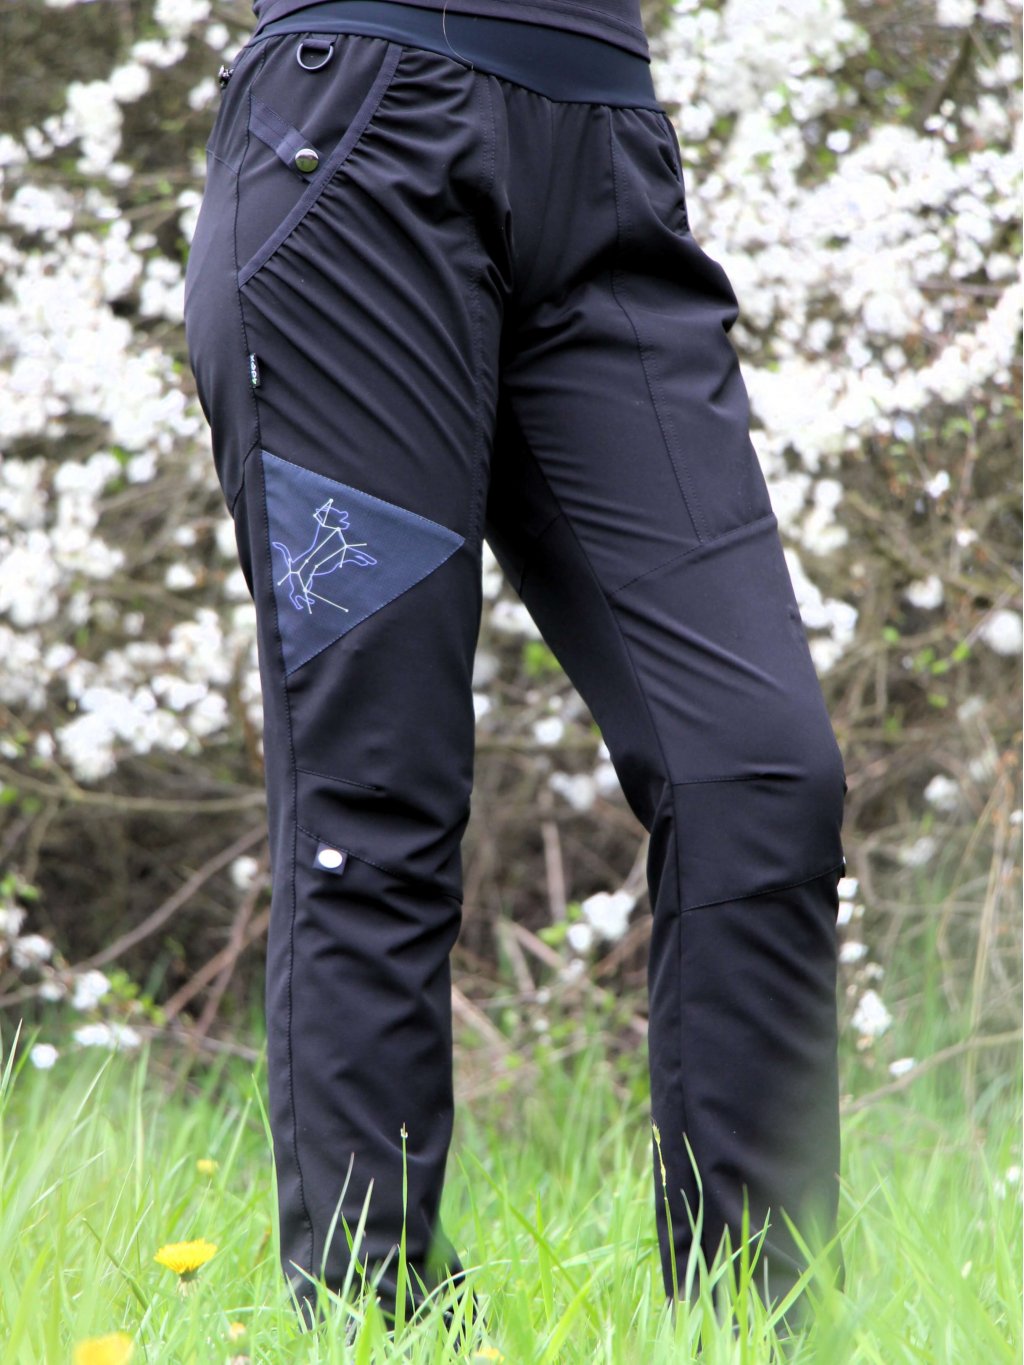 Women's spring training trousers - 4dox constellation